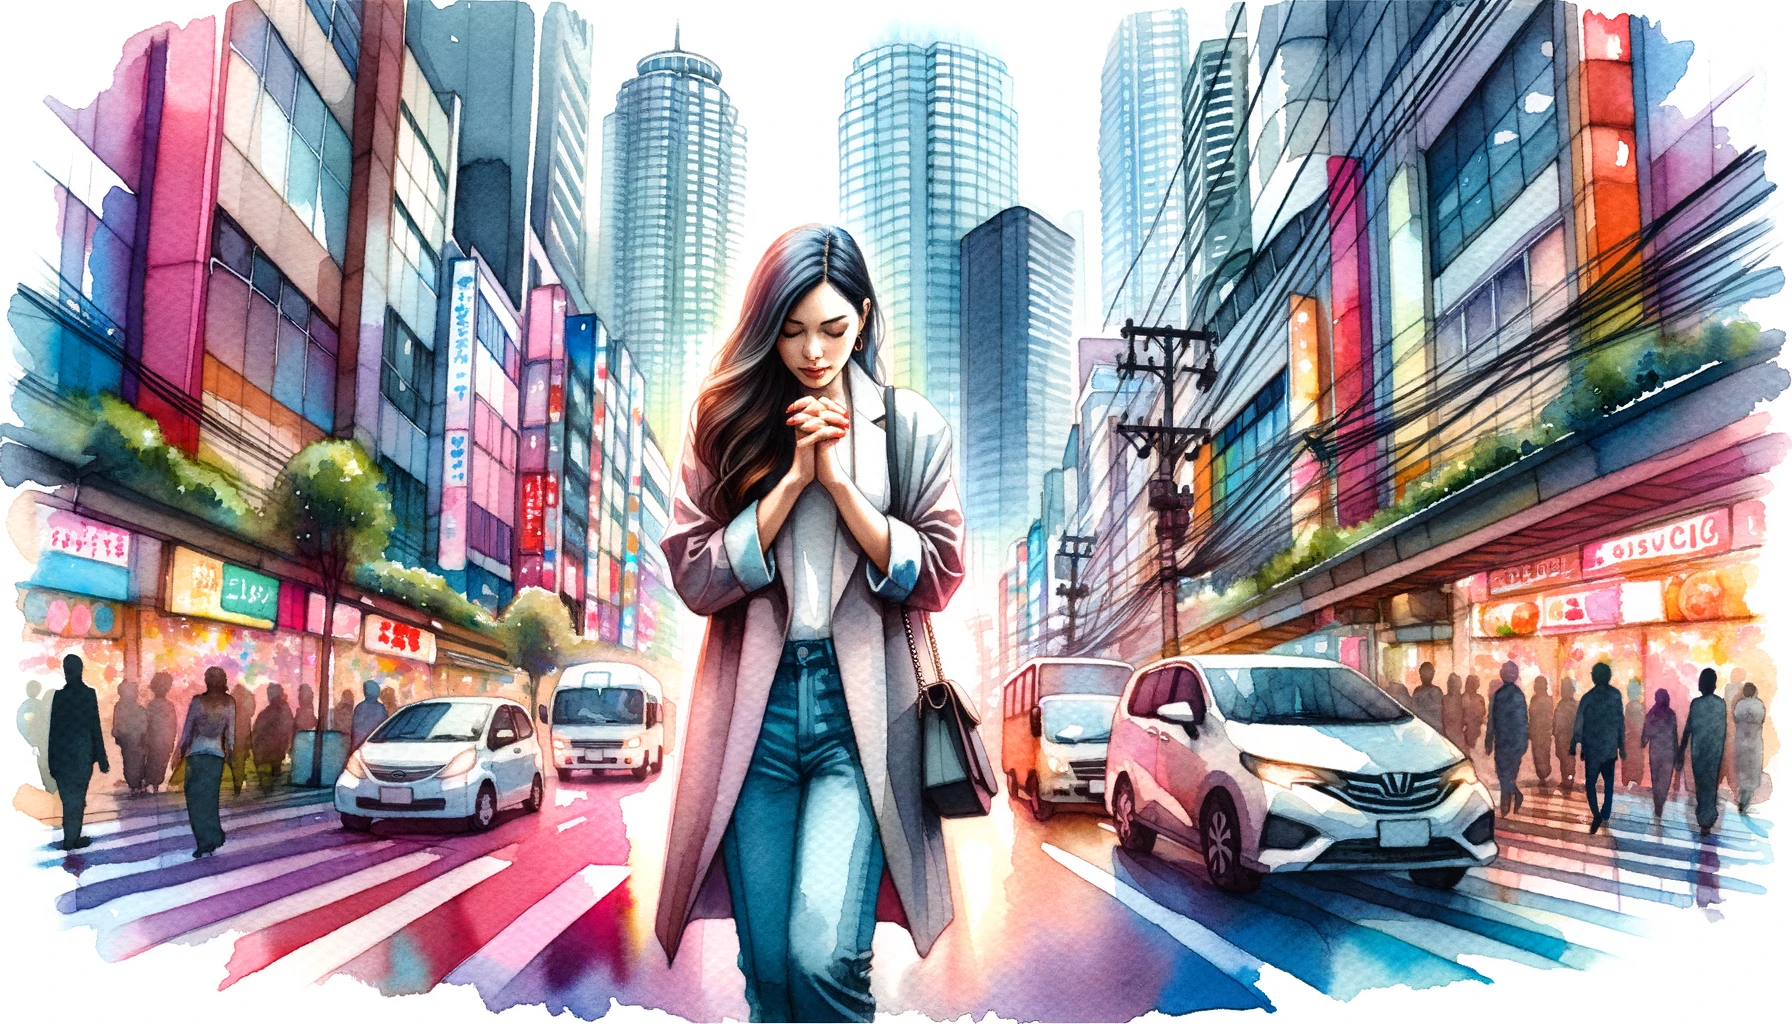 Young Christian woman prayer walking through a vibrant cityscape, her hands eyes closed in prayer.